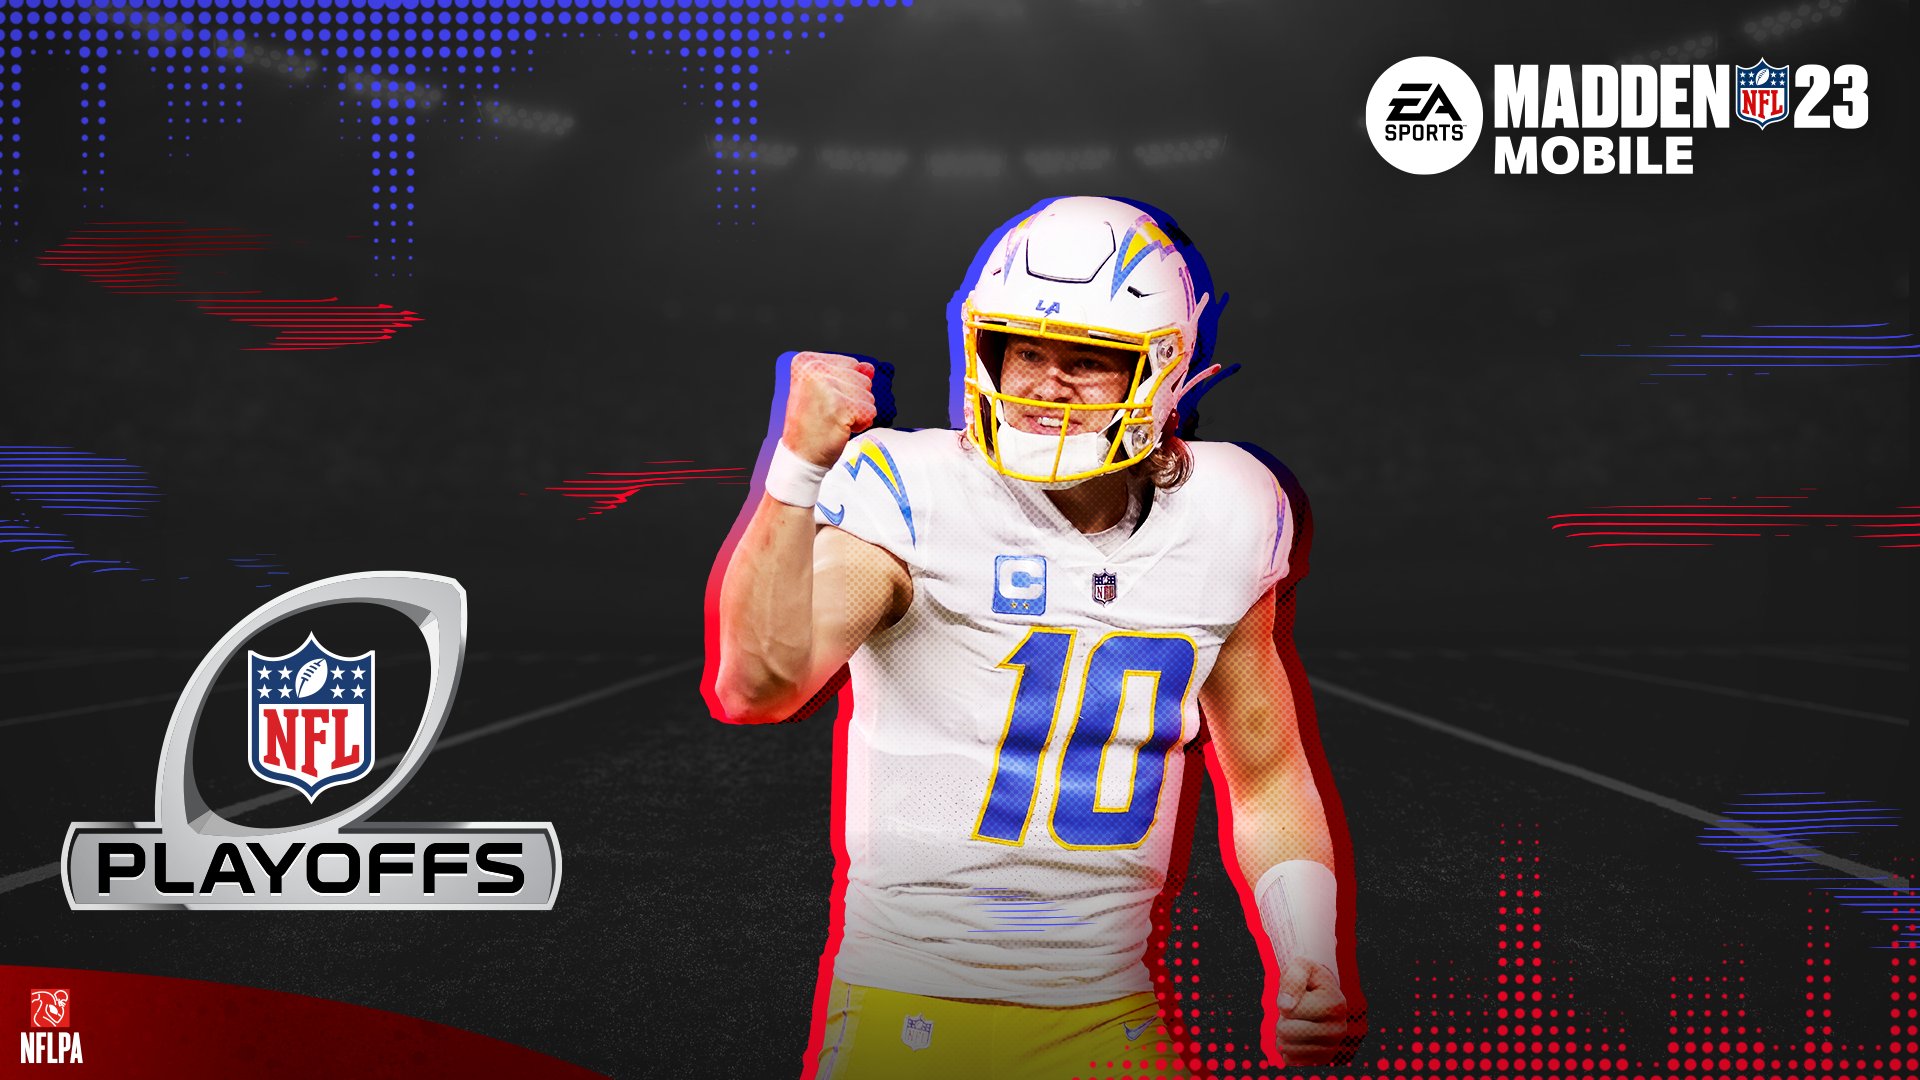 Madden NFL Mobile on X: 'The #NFLPlayoffs in Madden NFL 23 Mobile are about  to begin! 